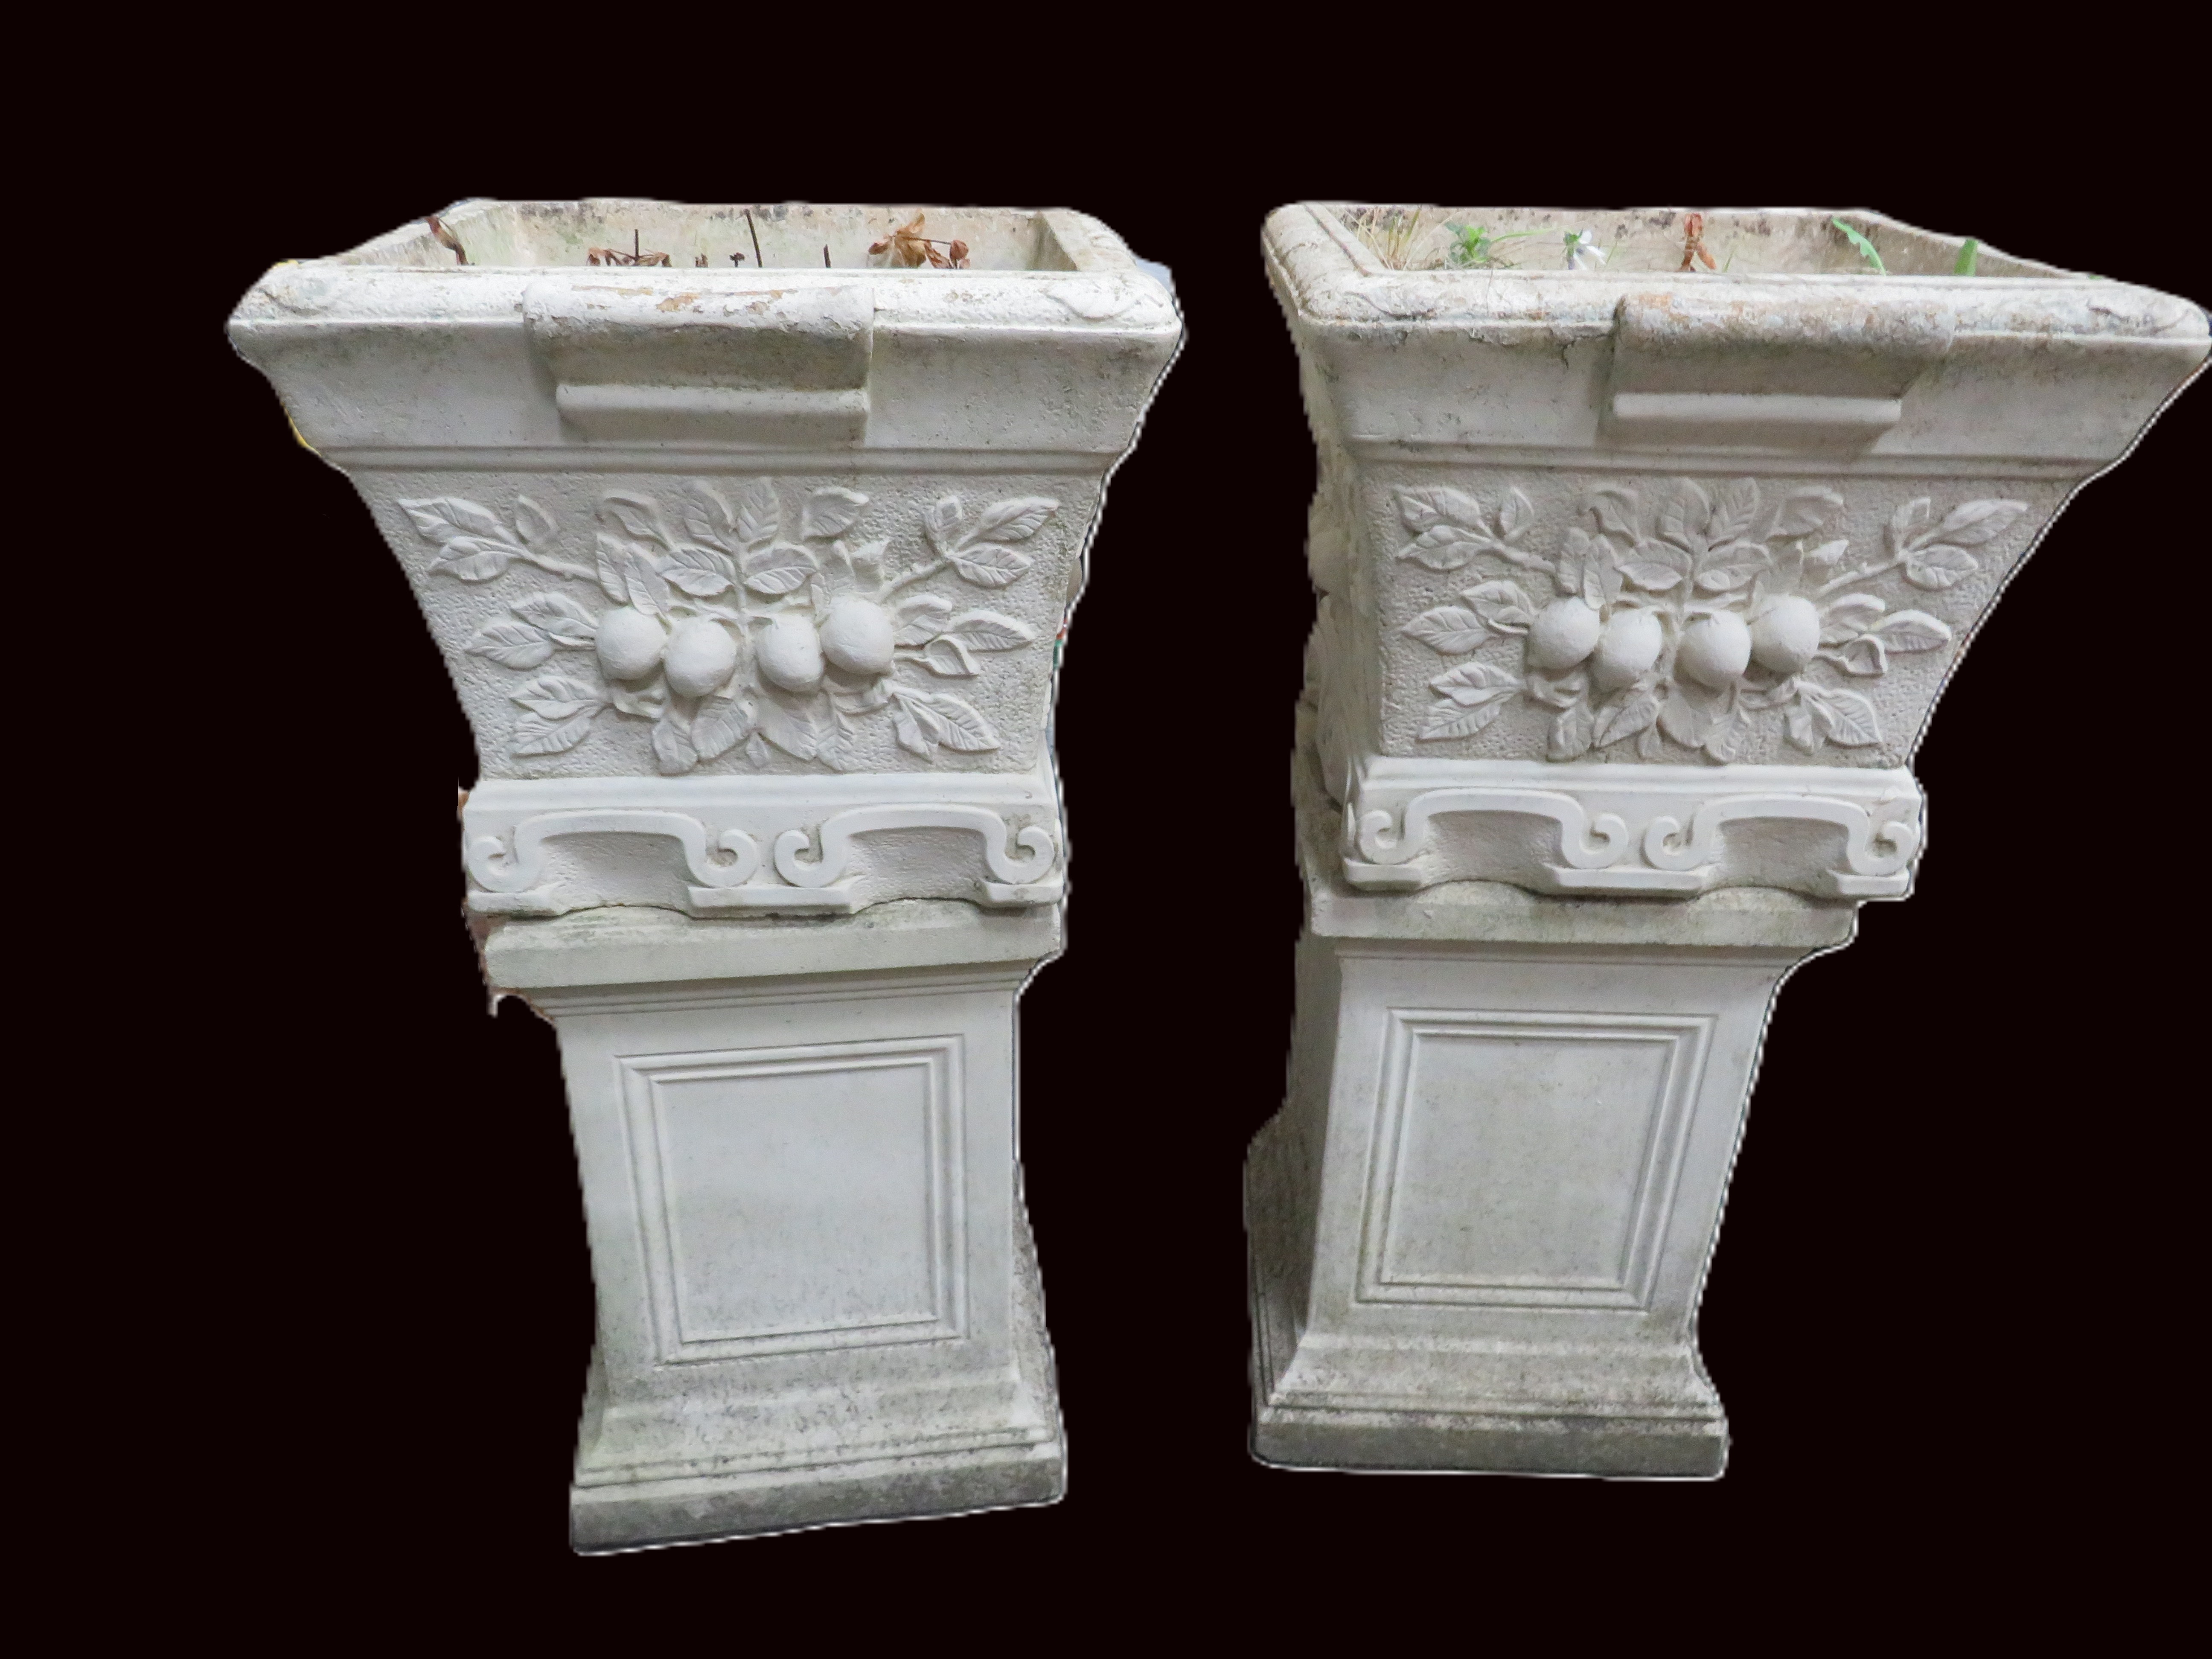 Matched pair of Stone/Yorkstone planters. Each measures approx H:33 x W:17 x D:17 Inches. See photos